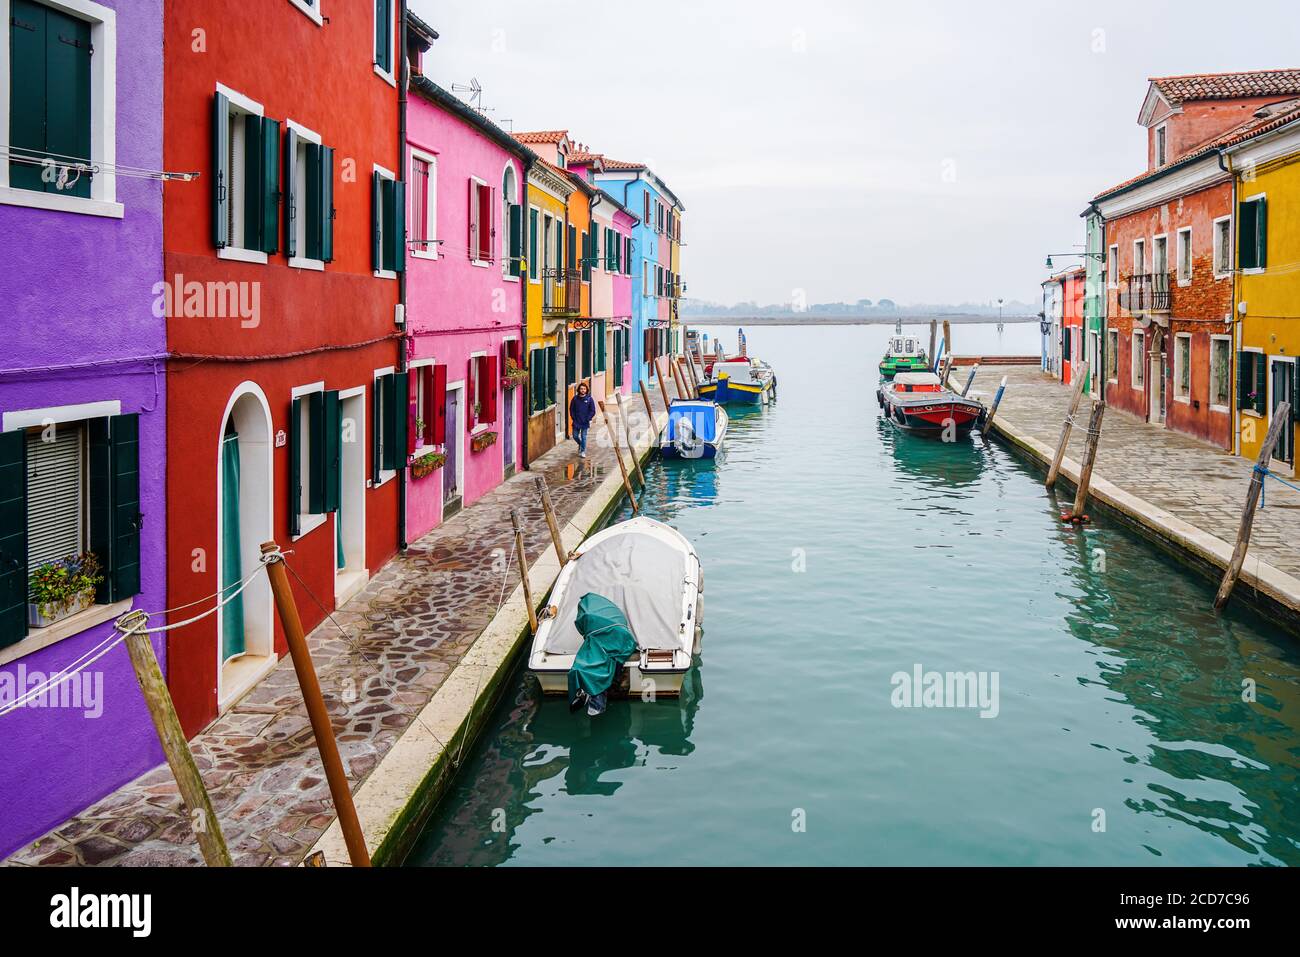 Venice, Italy - January 2020: Colorful houses in Burano Island along quaint canal with boats docked at riverside Stock Photo